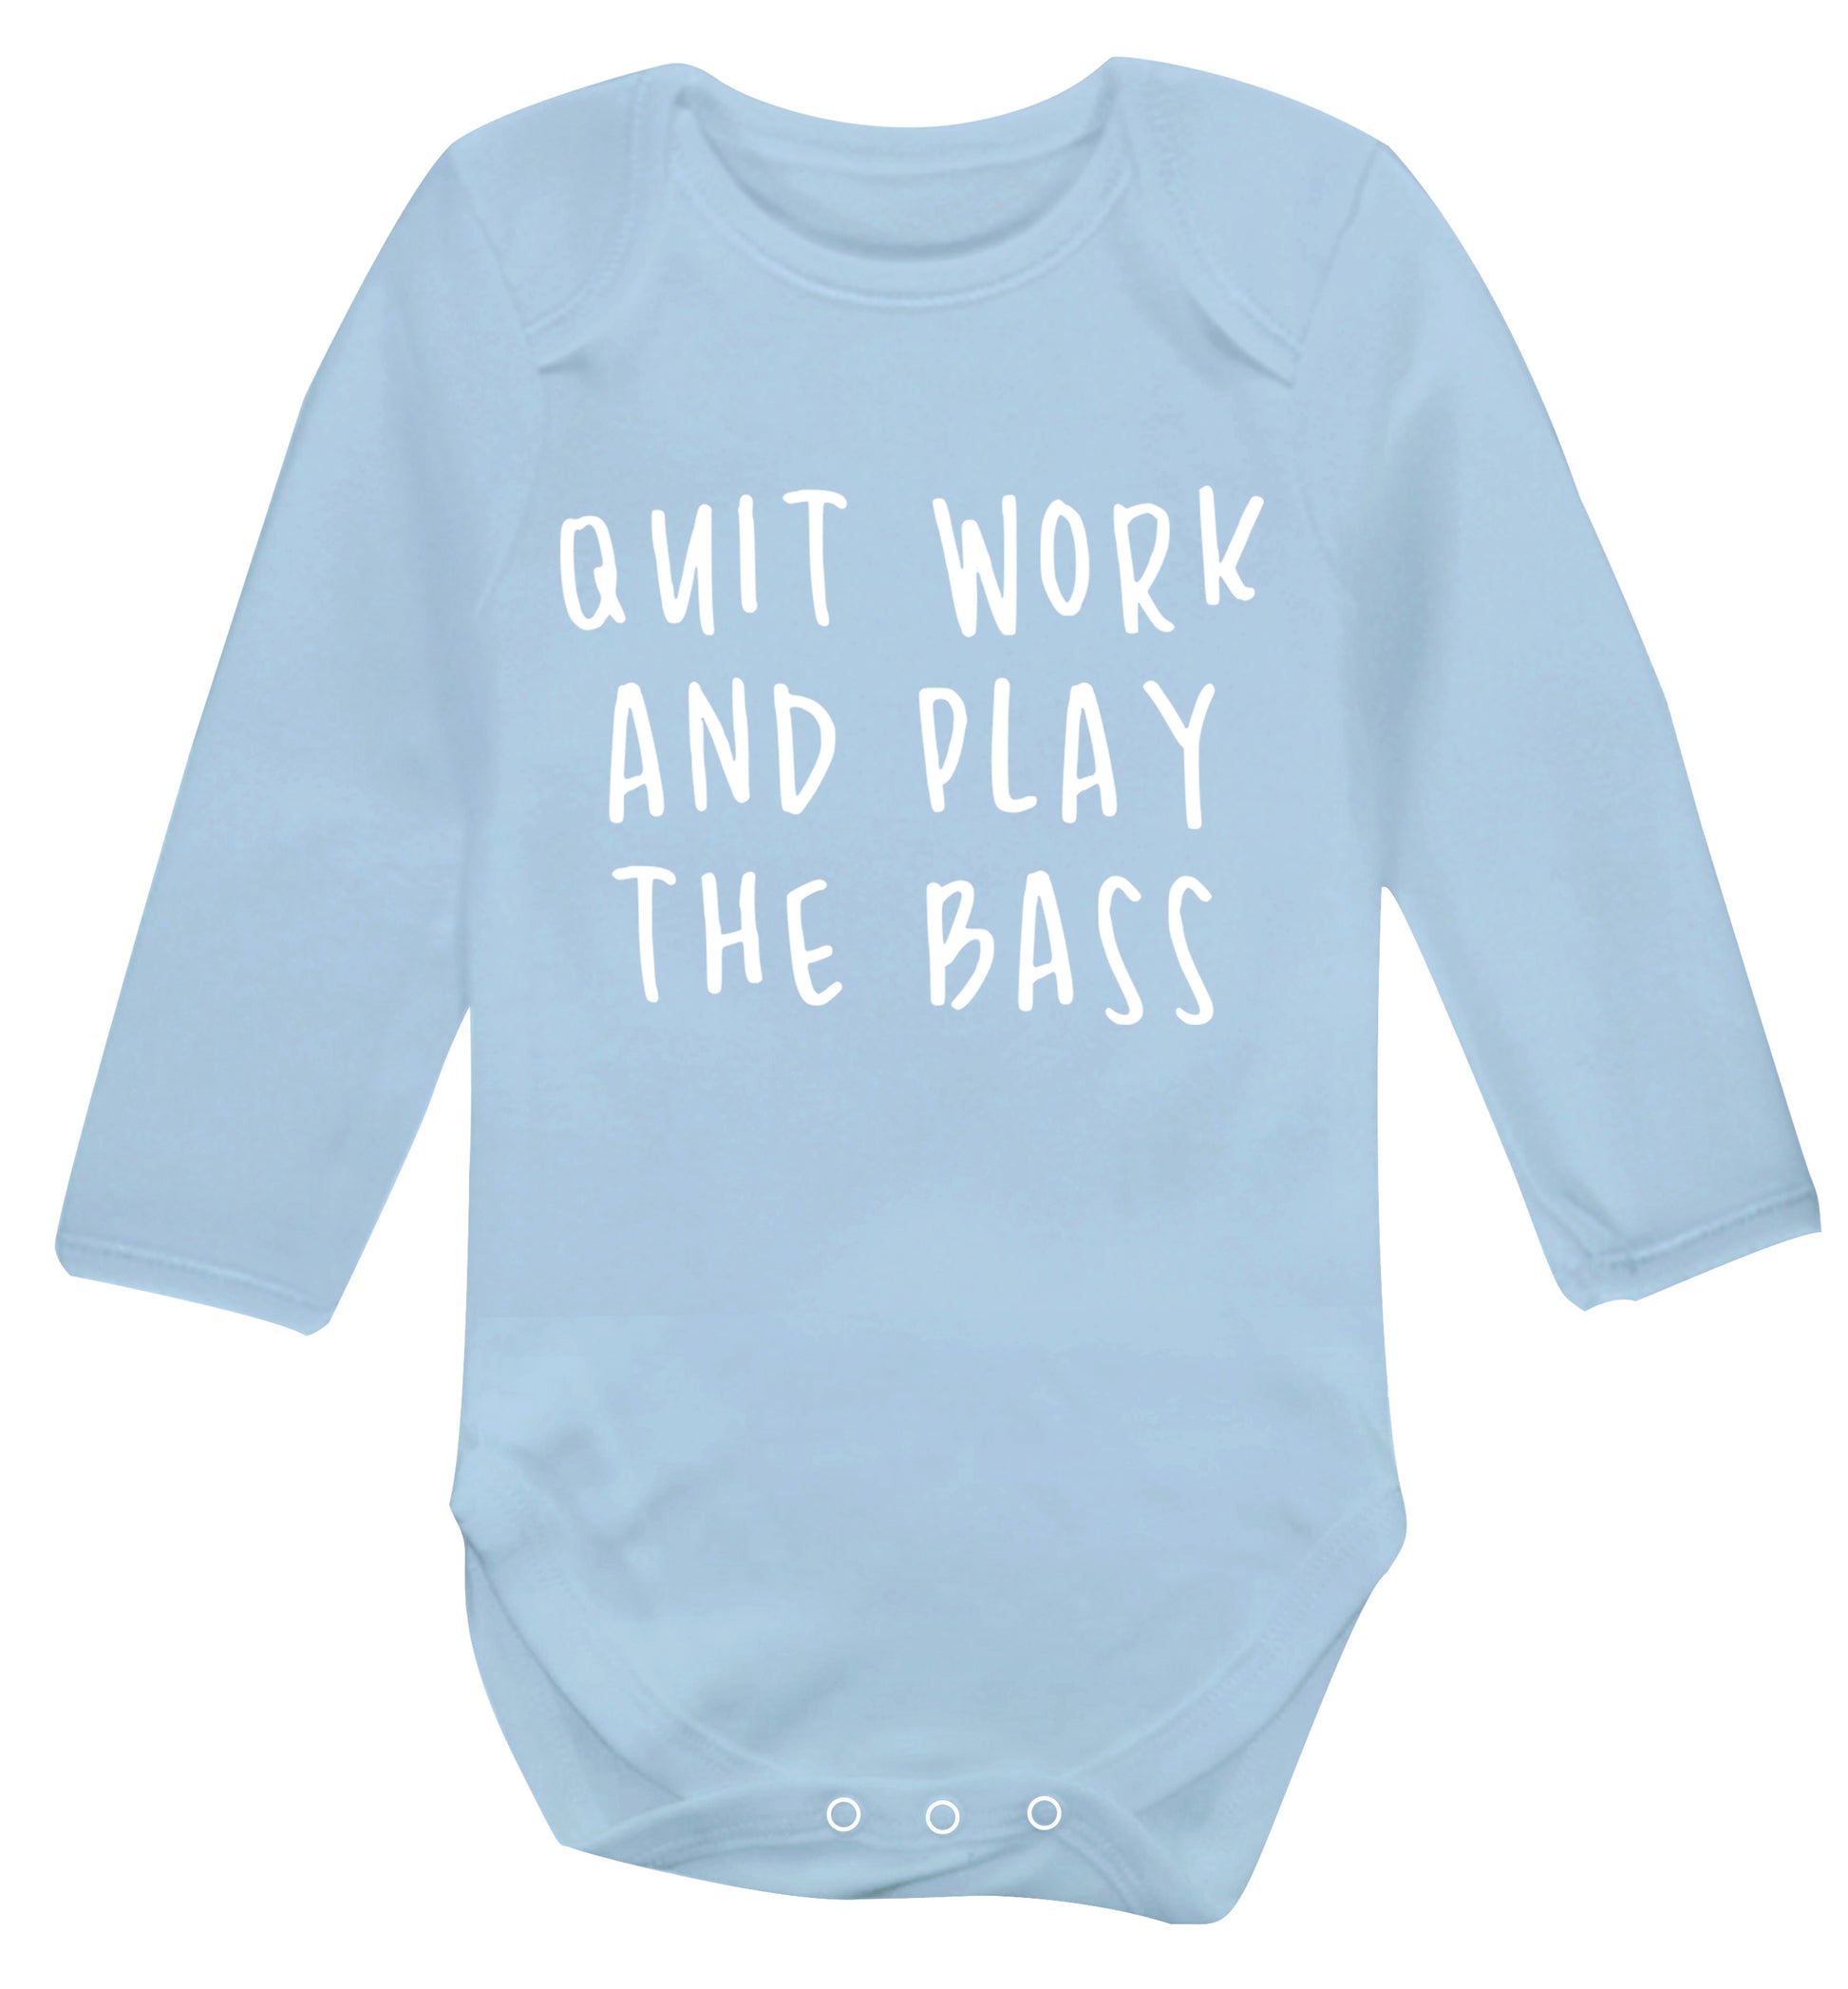 Quit work and play the bass Baby Vest long sleeved pale blue 6-12 months